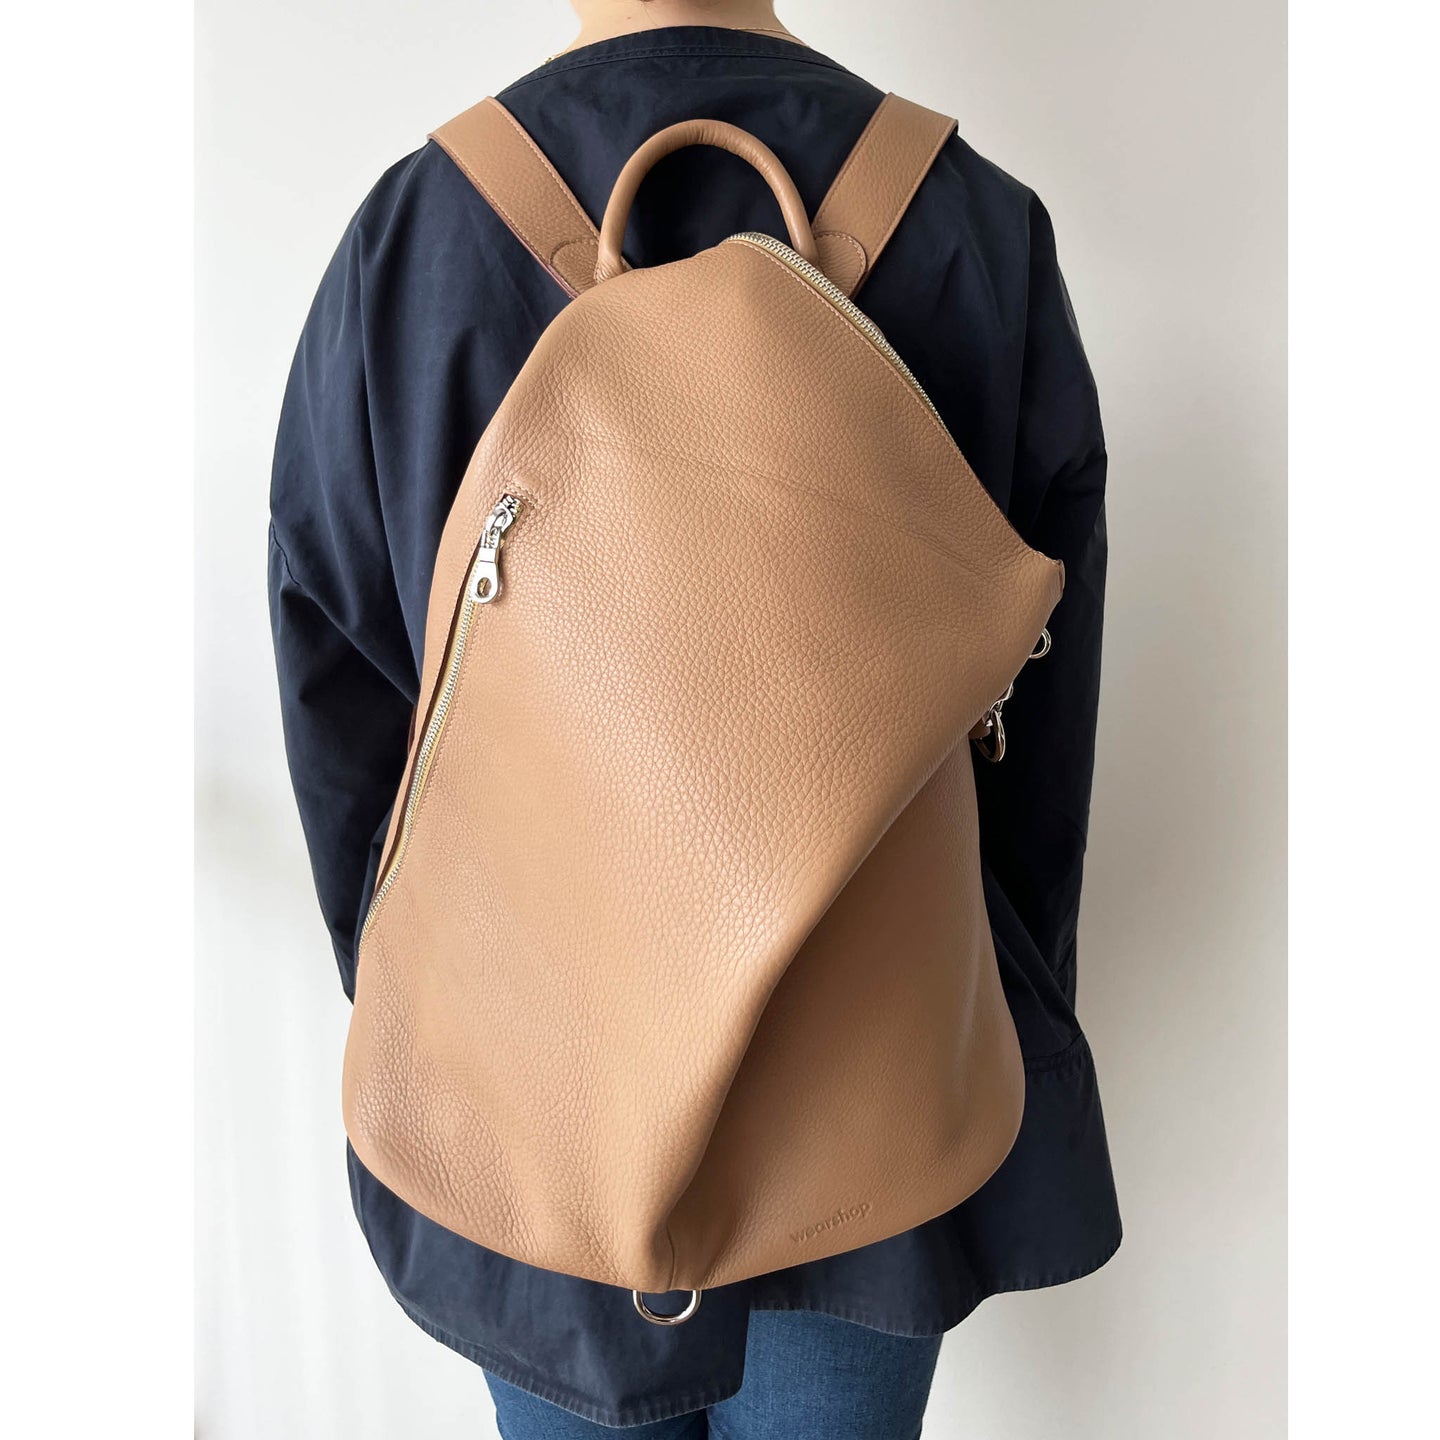 The Mercato Backpack in Camel